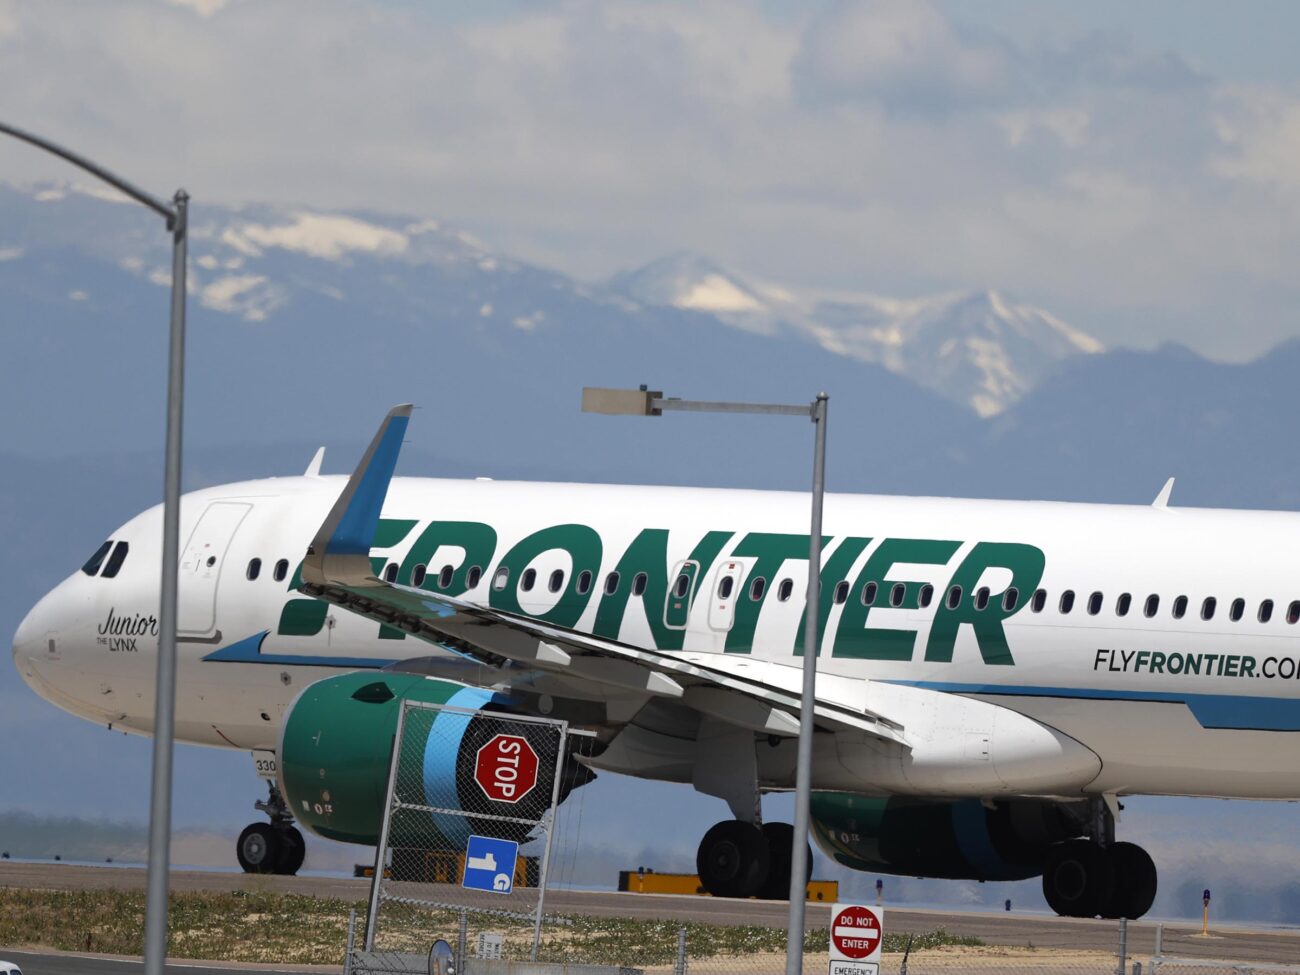 A Frontier Airlines passenger was duct-taped to his seat after allegedly molesting & assaulting the flight crew. Review the video of the shocking event!